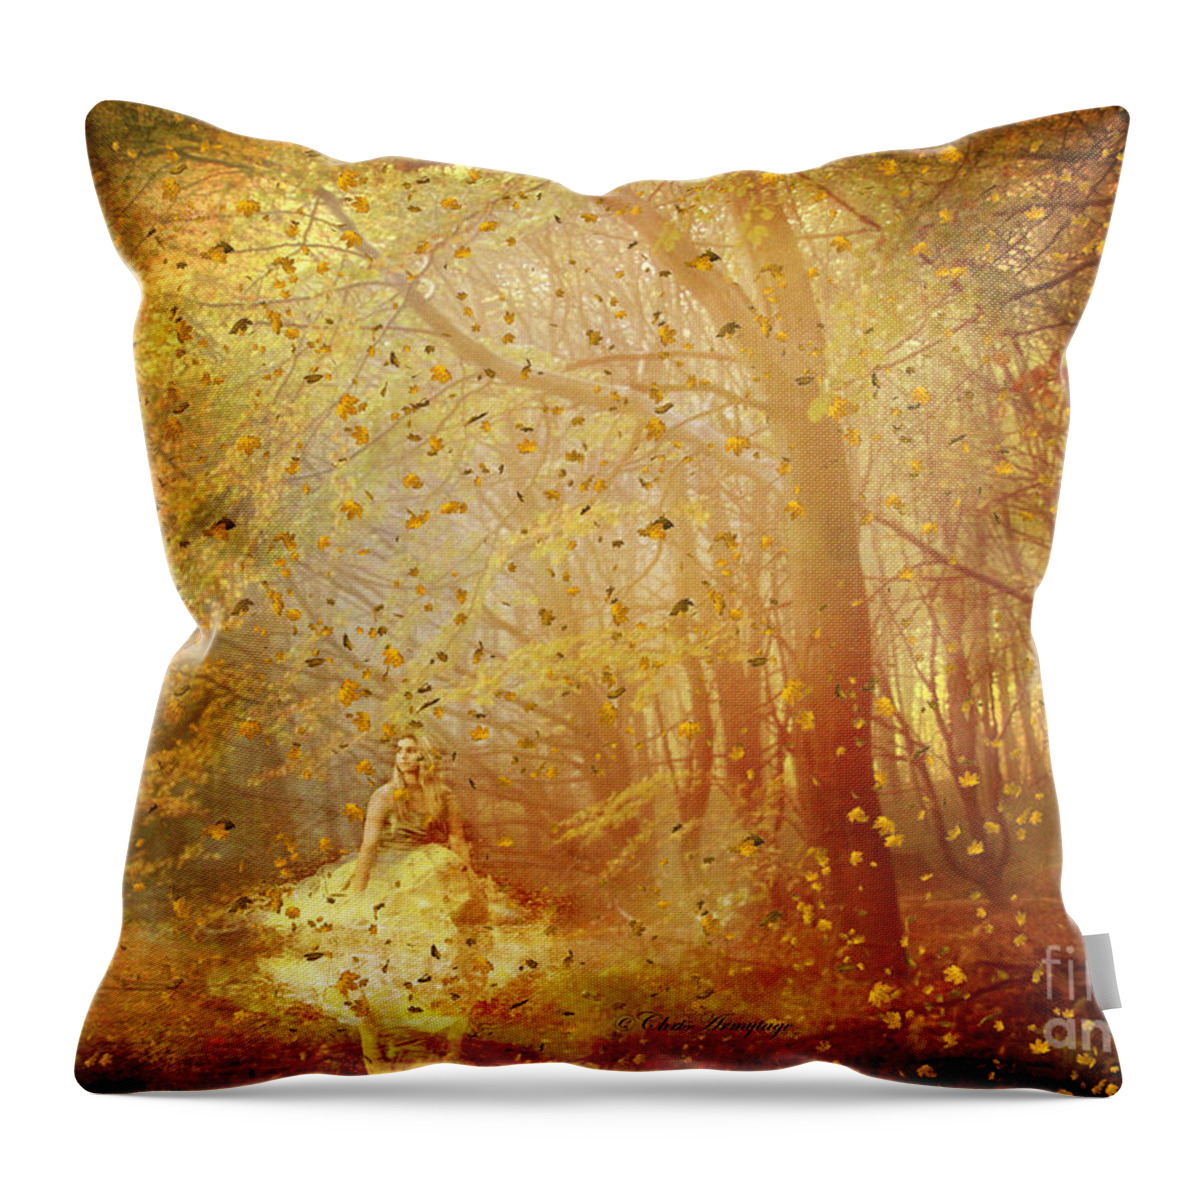 Imaginary Landscape Throw Pillow featuring the digital art Falling ... by Chris Armytage